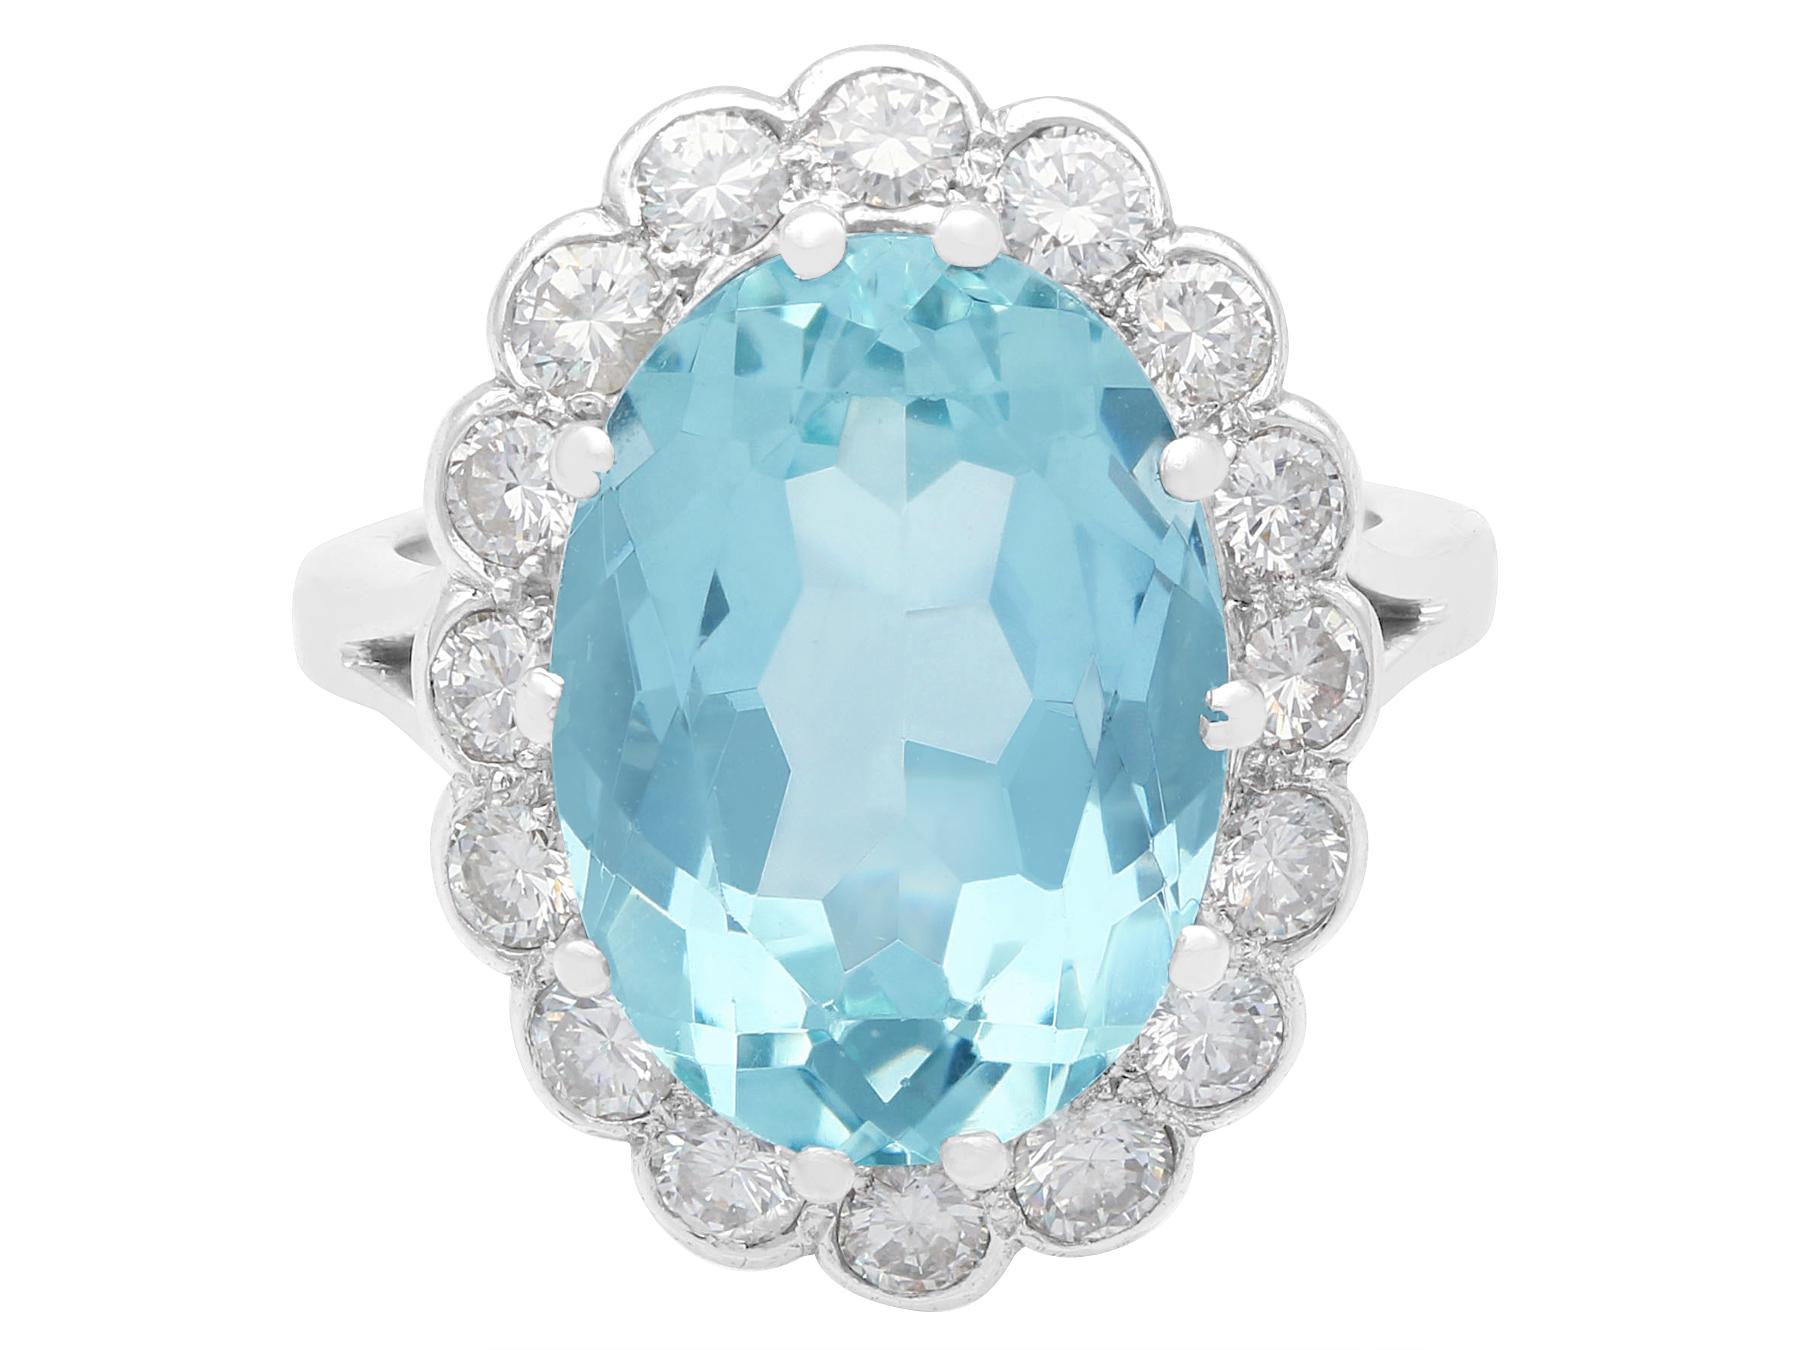 7.65 Carat Aquamarine and 1.02 Carat Diamond White Gold Cocktail Ring In Excellent Condition For Sale In Jesmond, Newcastle Upon Tyne